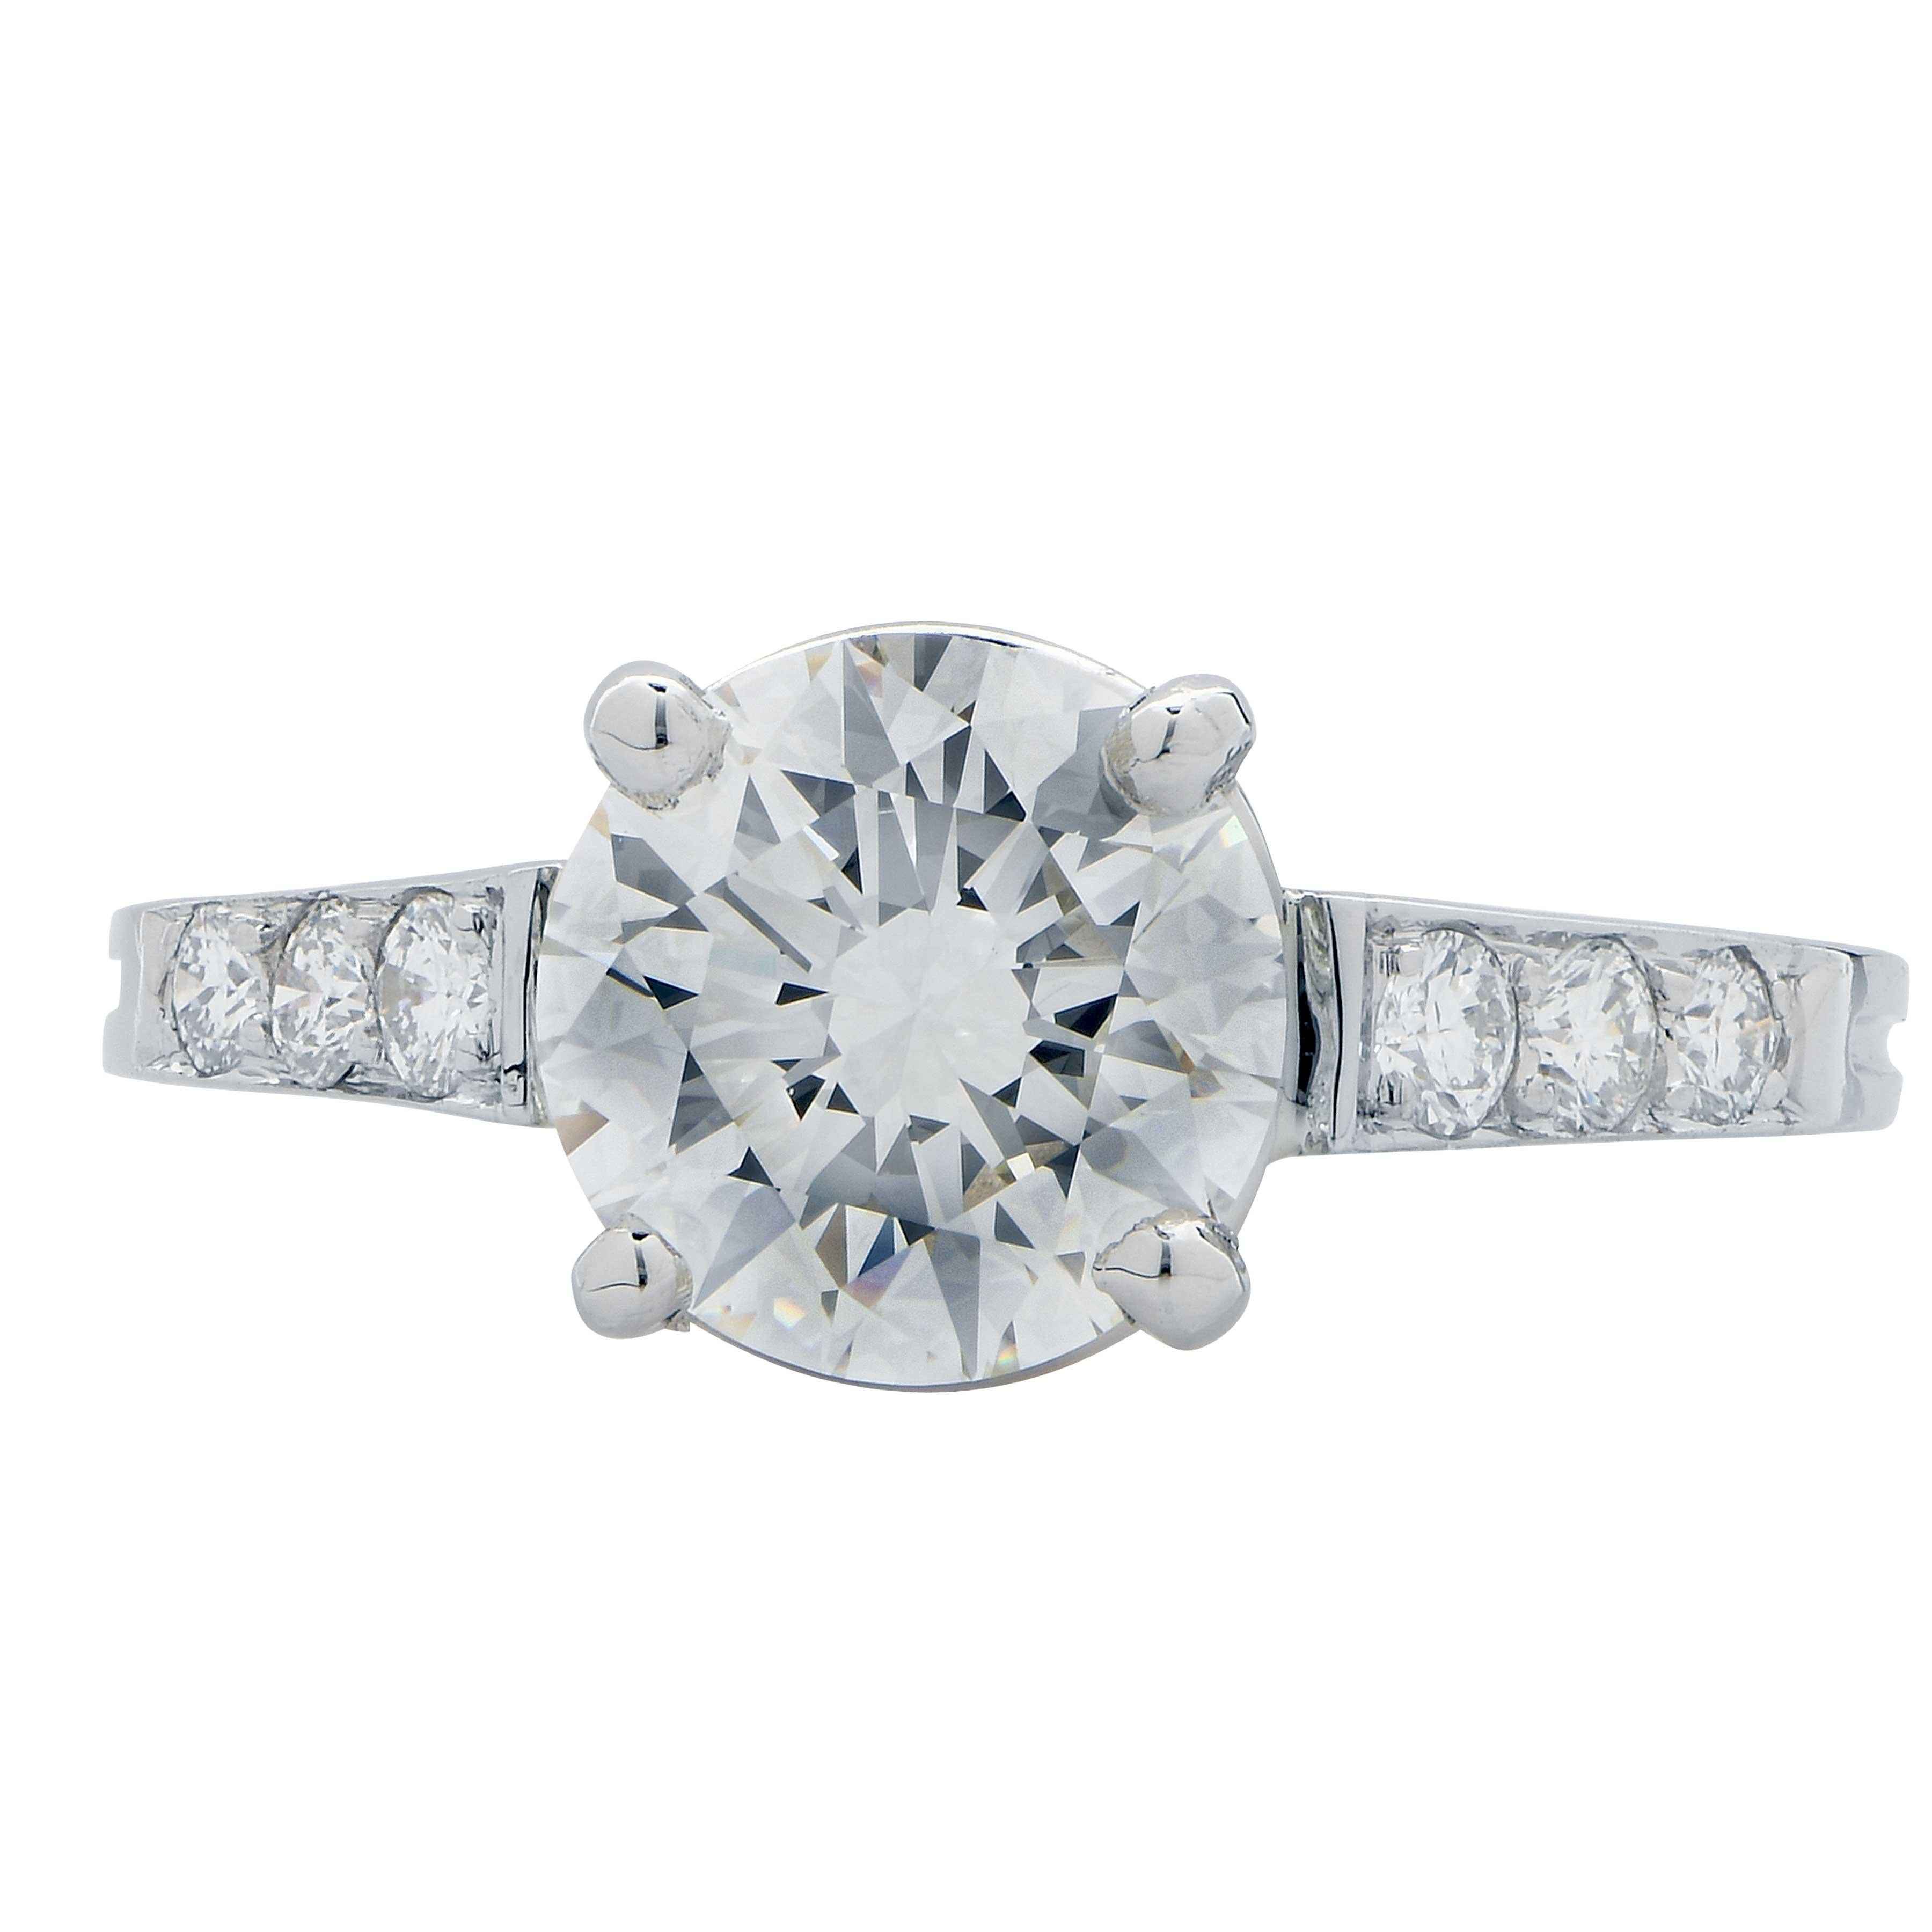 2.13 Carat GIA Graded H Color, VVS2 Clarity, Round Brilliant Cut Diamond set in platinum mounting with six round brilliant cut diamonds with an estimated weight of 1 ct. This beautiful and classic engagement ring is bright and full of life.
Ring